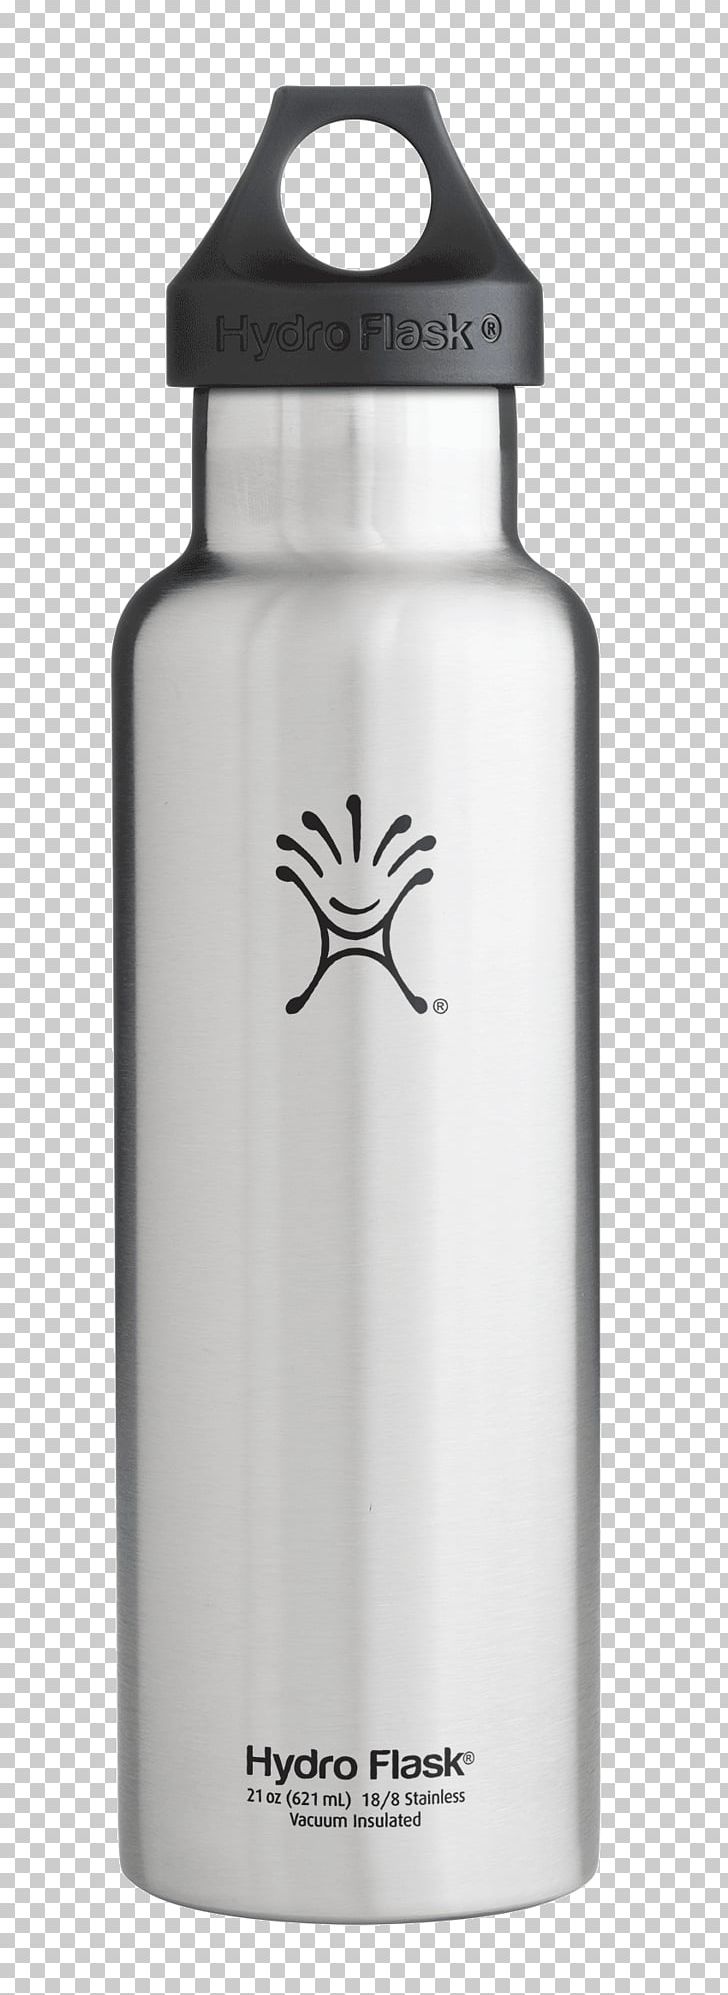 Water Bottles Thermal Insulation Vacuum Insulated Panel Hydro Flask PNG, Clipart, Bottle, Brewmaster, Drink, Drinkware, Flask Free PNG Download